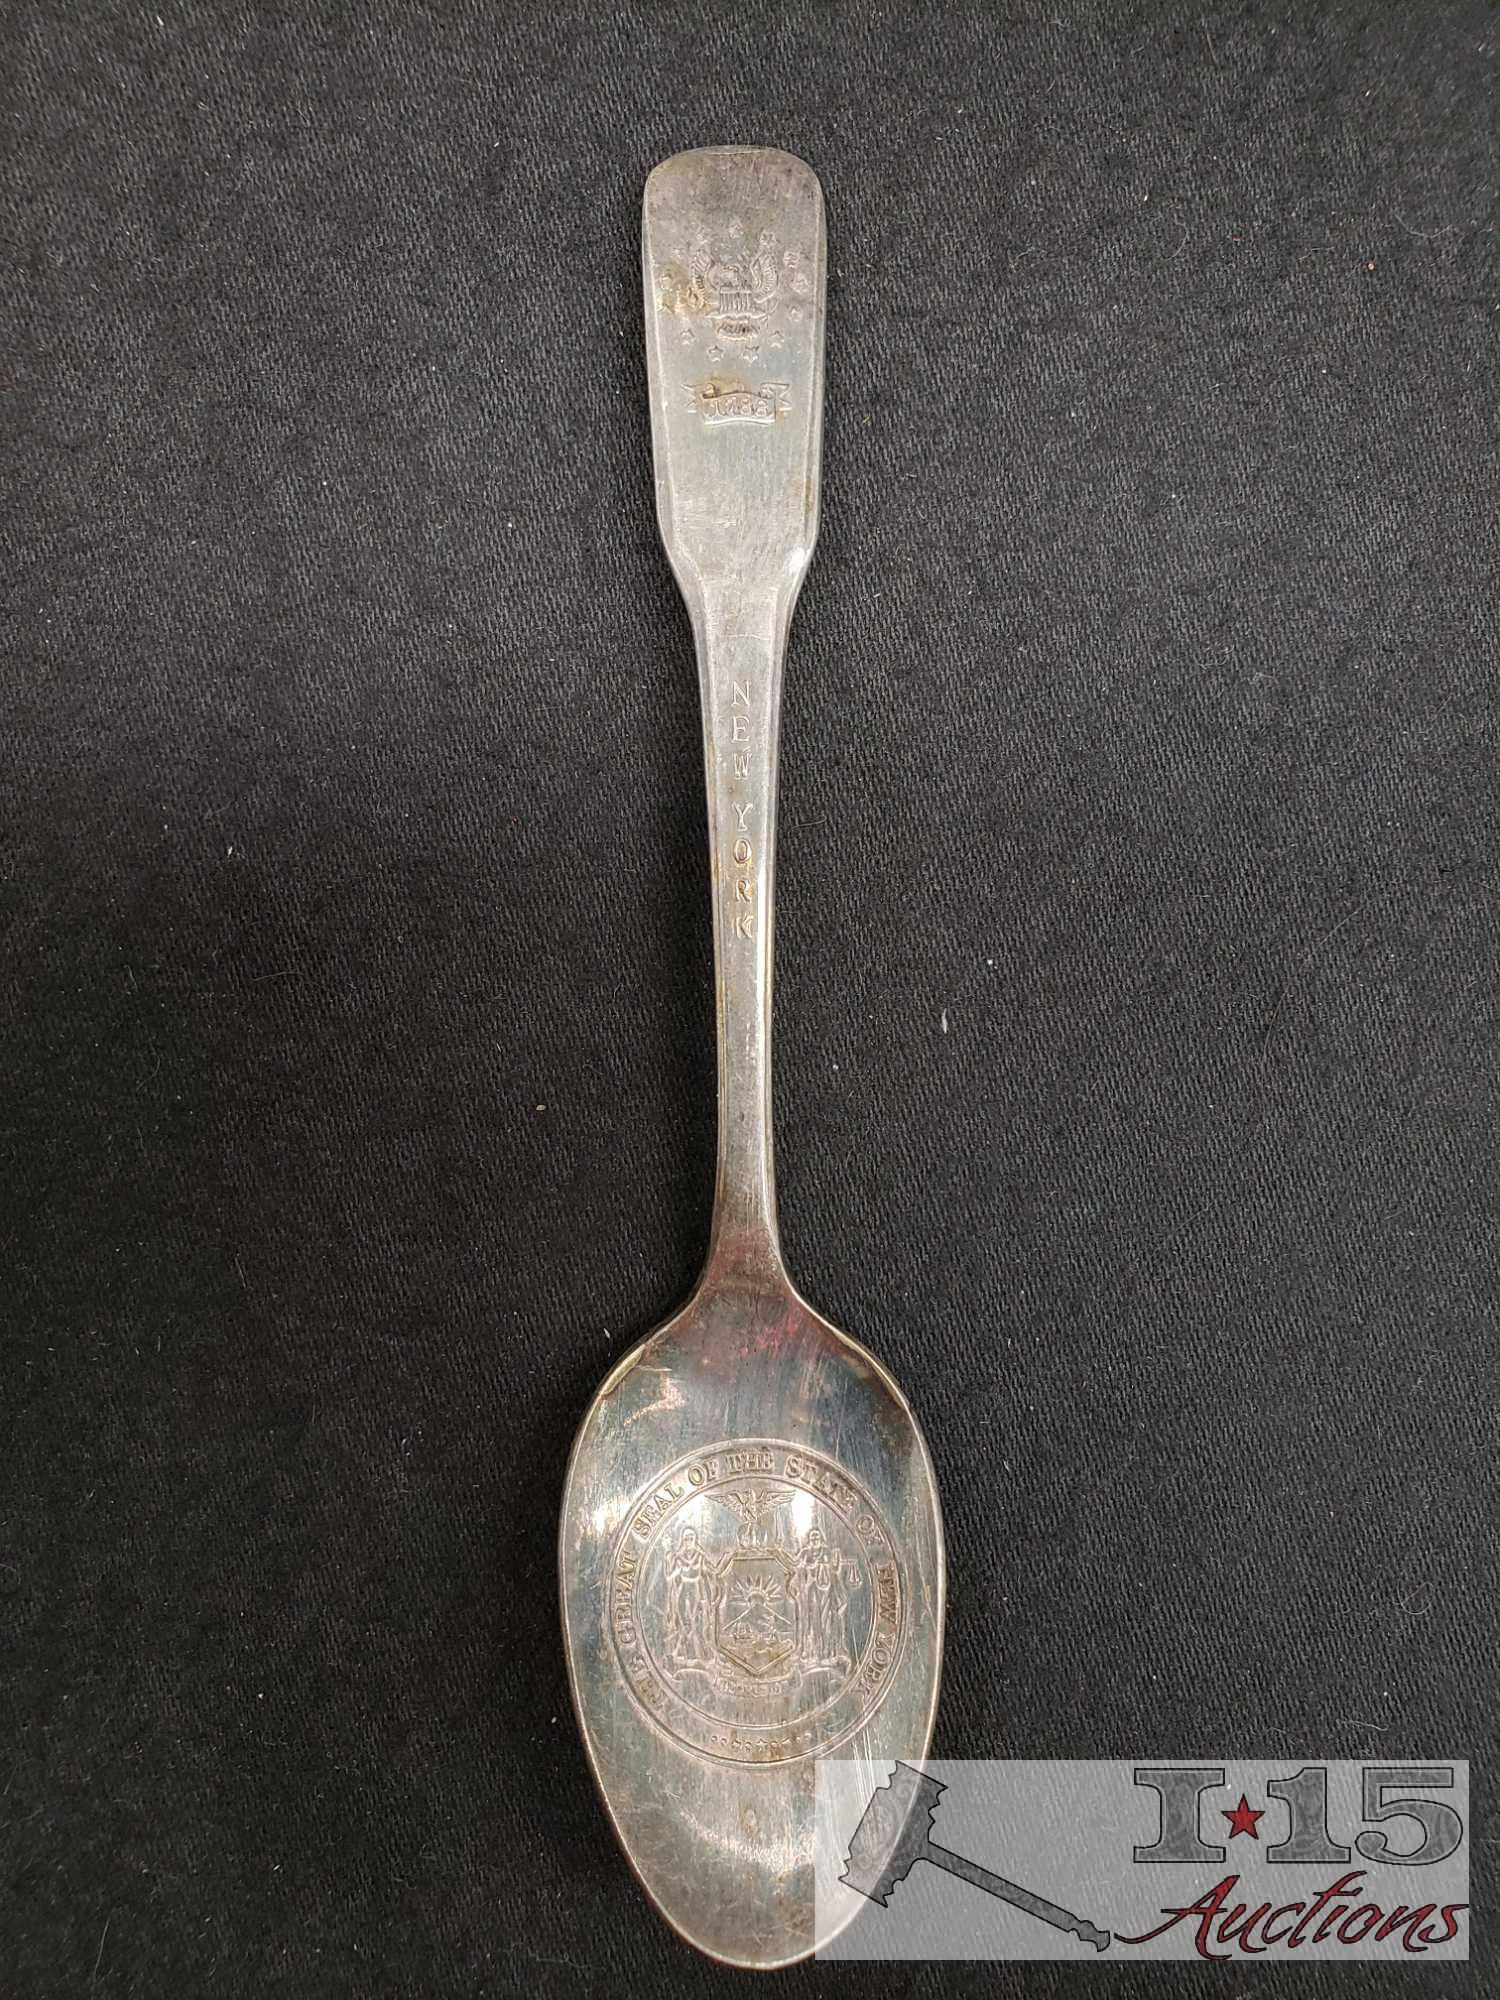 Silver Plated Bicentalenial Spoons, Serving Spoons, knifes, a Lighter Casing and other Decorative